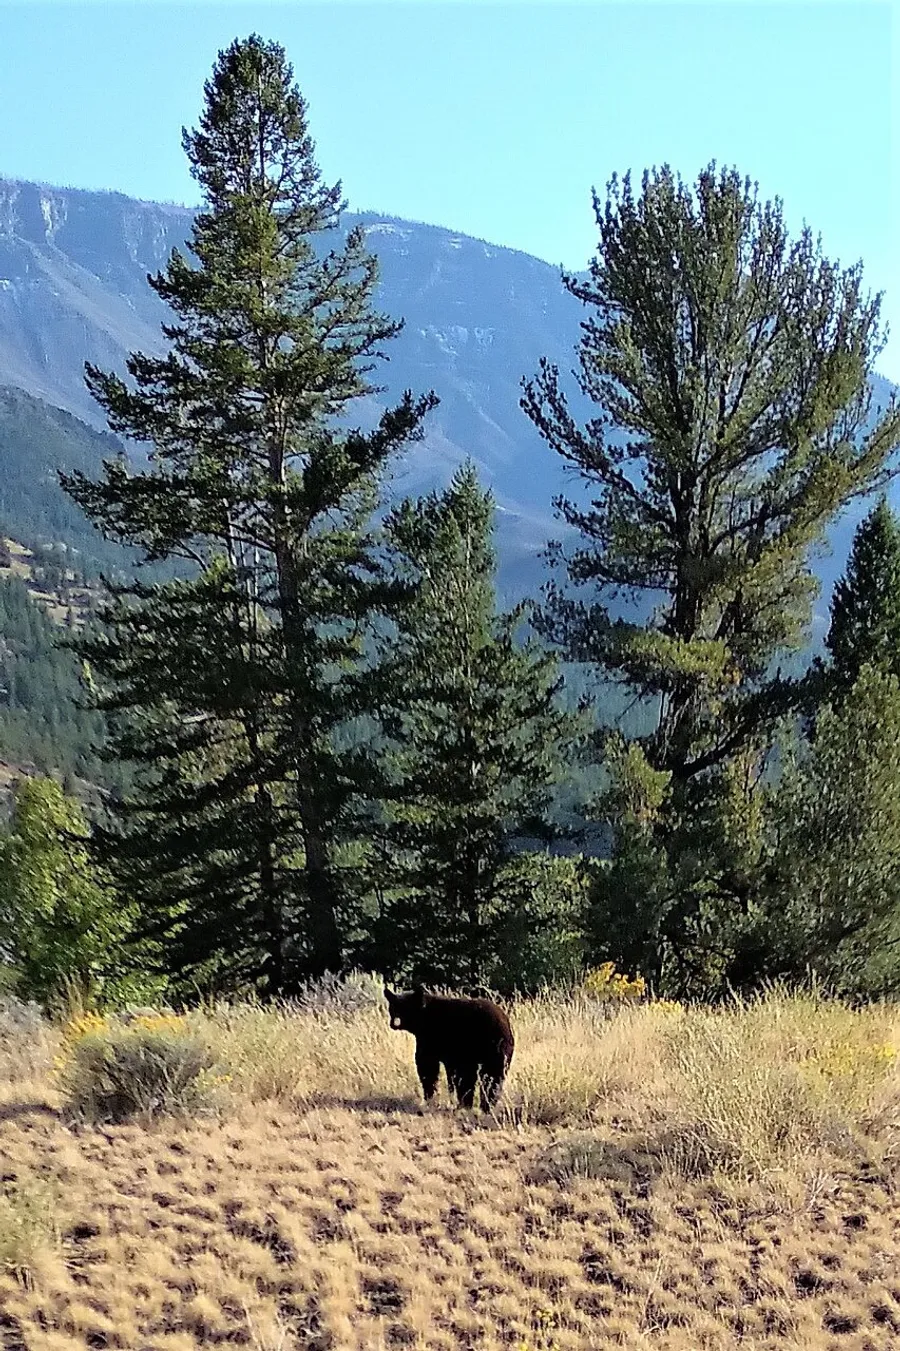 A bear is seen wandering through a grassy clearing with a backdrop of tall trees and mountainous terrain.